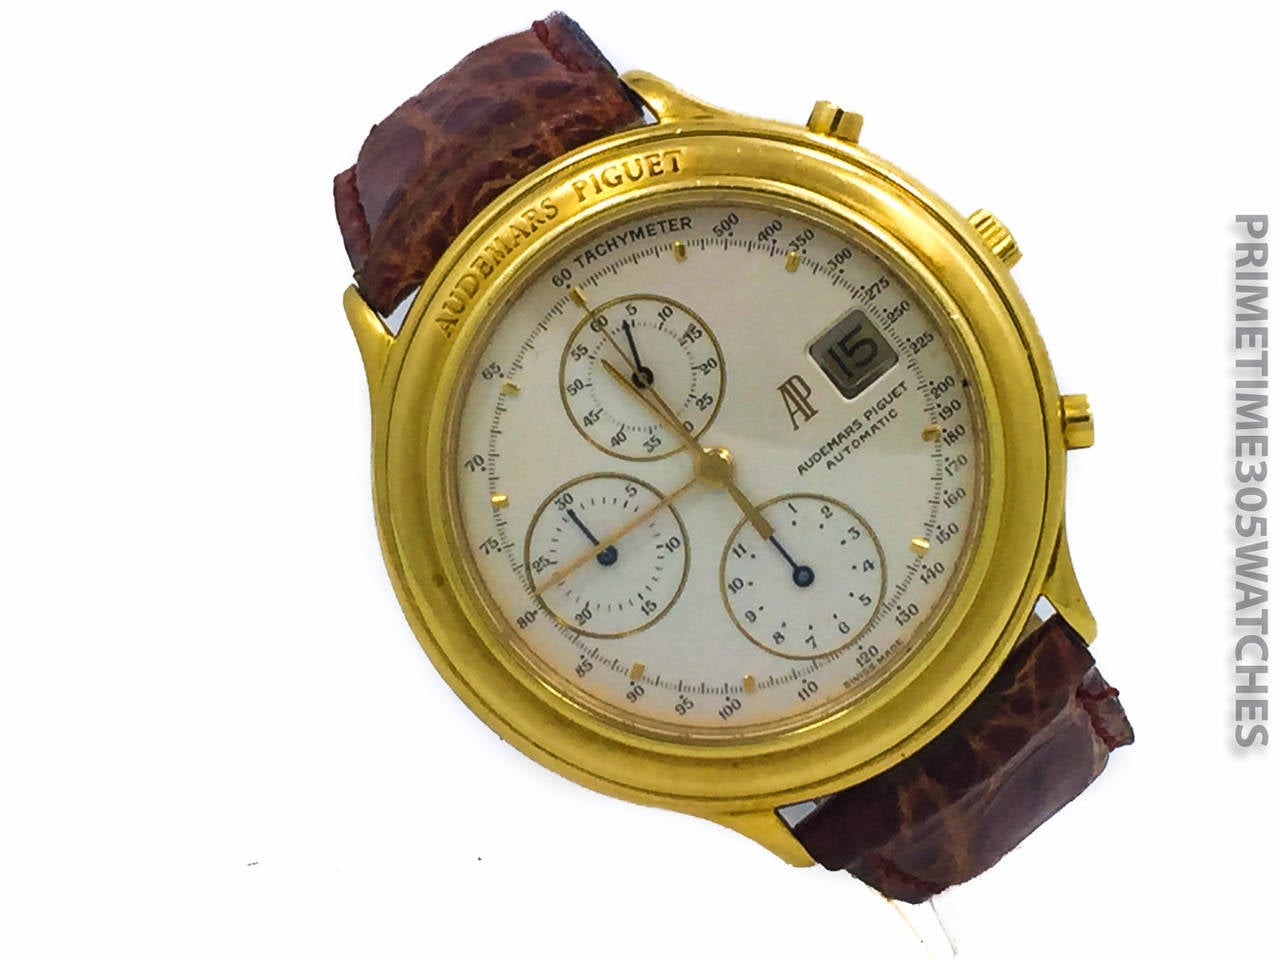 Mens Audemars Piguet Huitieme 40mm 18k Yellow Gold Chronograph Watch. Features a Automatic Winding Movement. The Watch is on a AP Strap & AP 18k Deployment Buckle. Note: Strap Fits Around a 7 Inch Wrist.